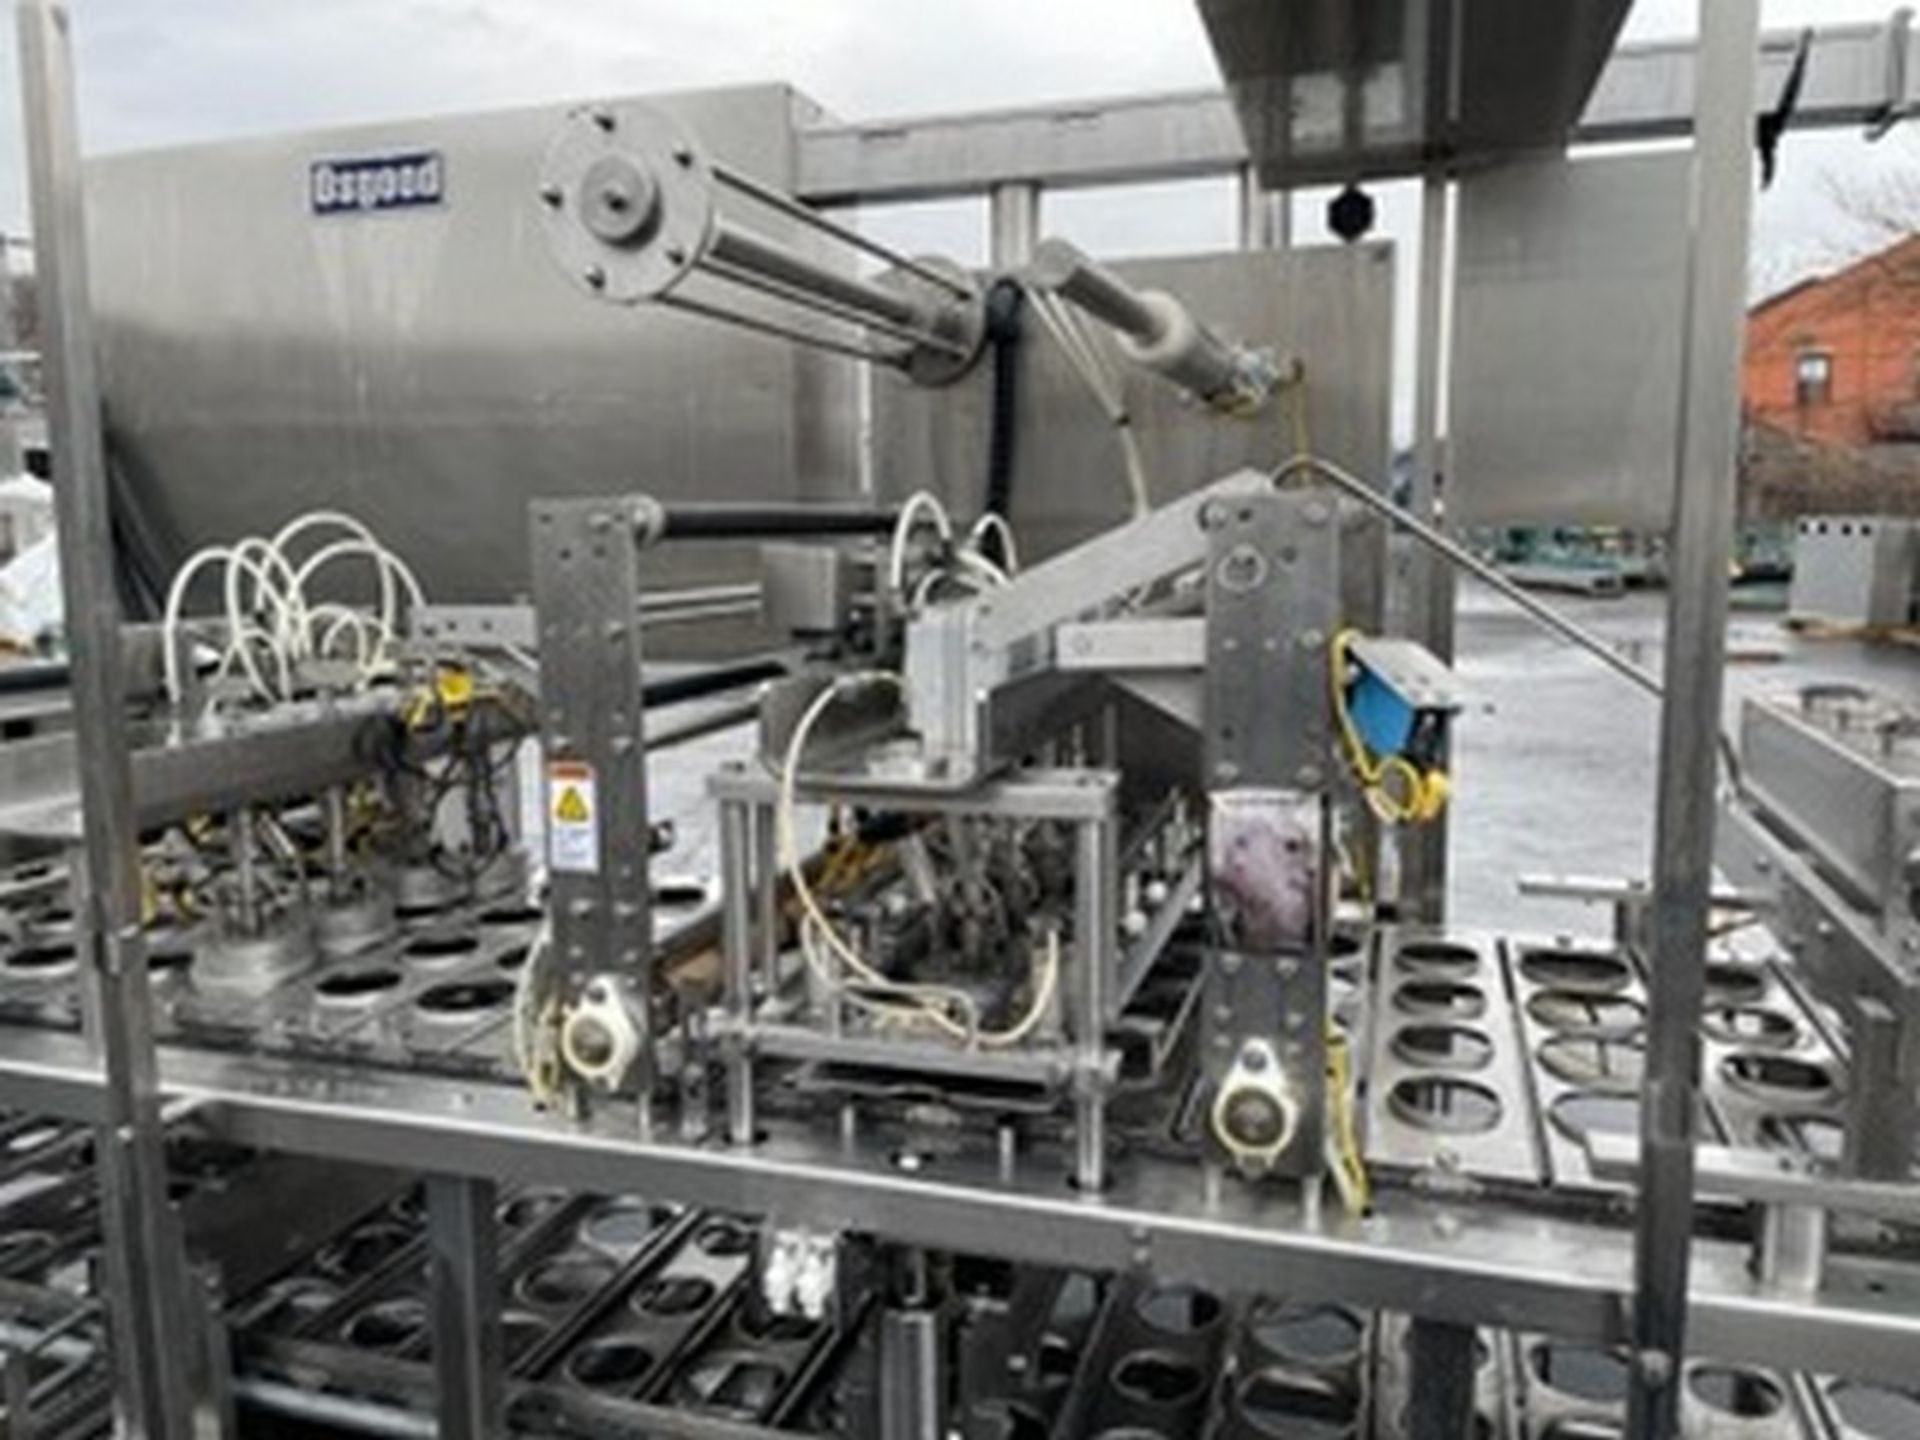 Osgood 4-Lane In-Line S/S Cup Filler,M/N 4800-E, S/N 351-840, Set Up with 3-5/8" W On-Board Change - Image 7 of 18